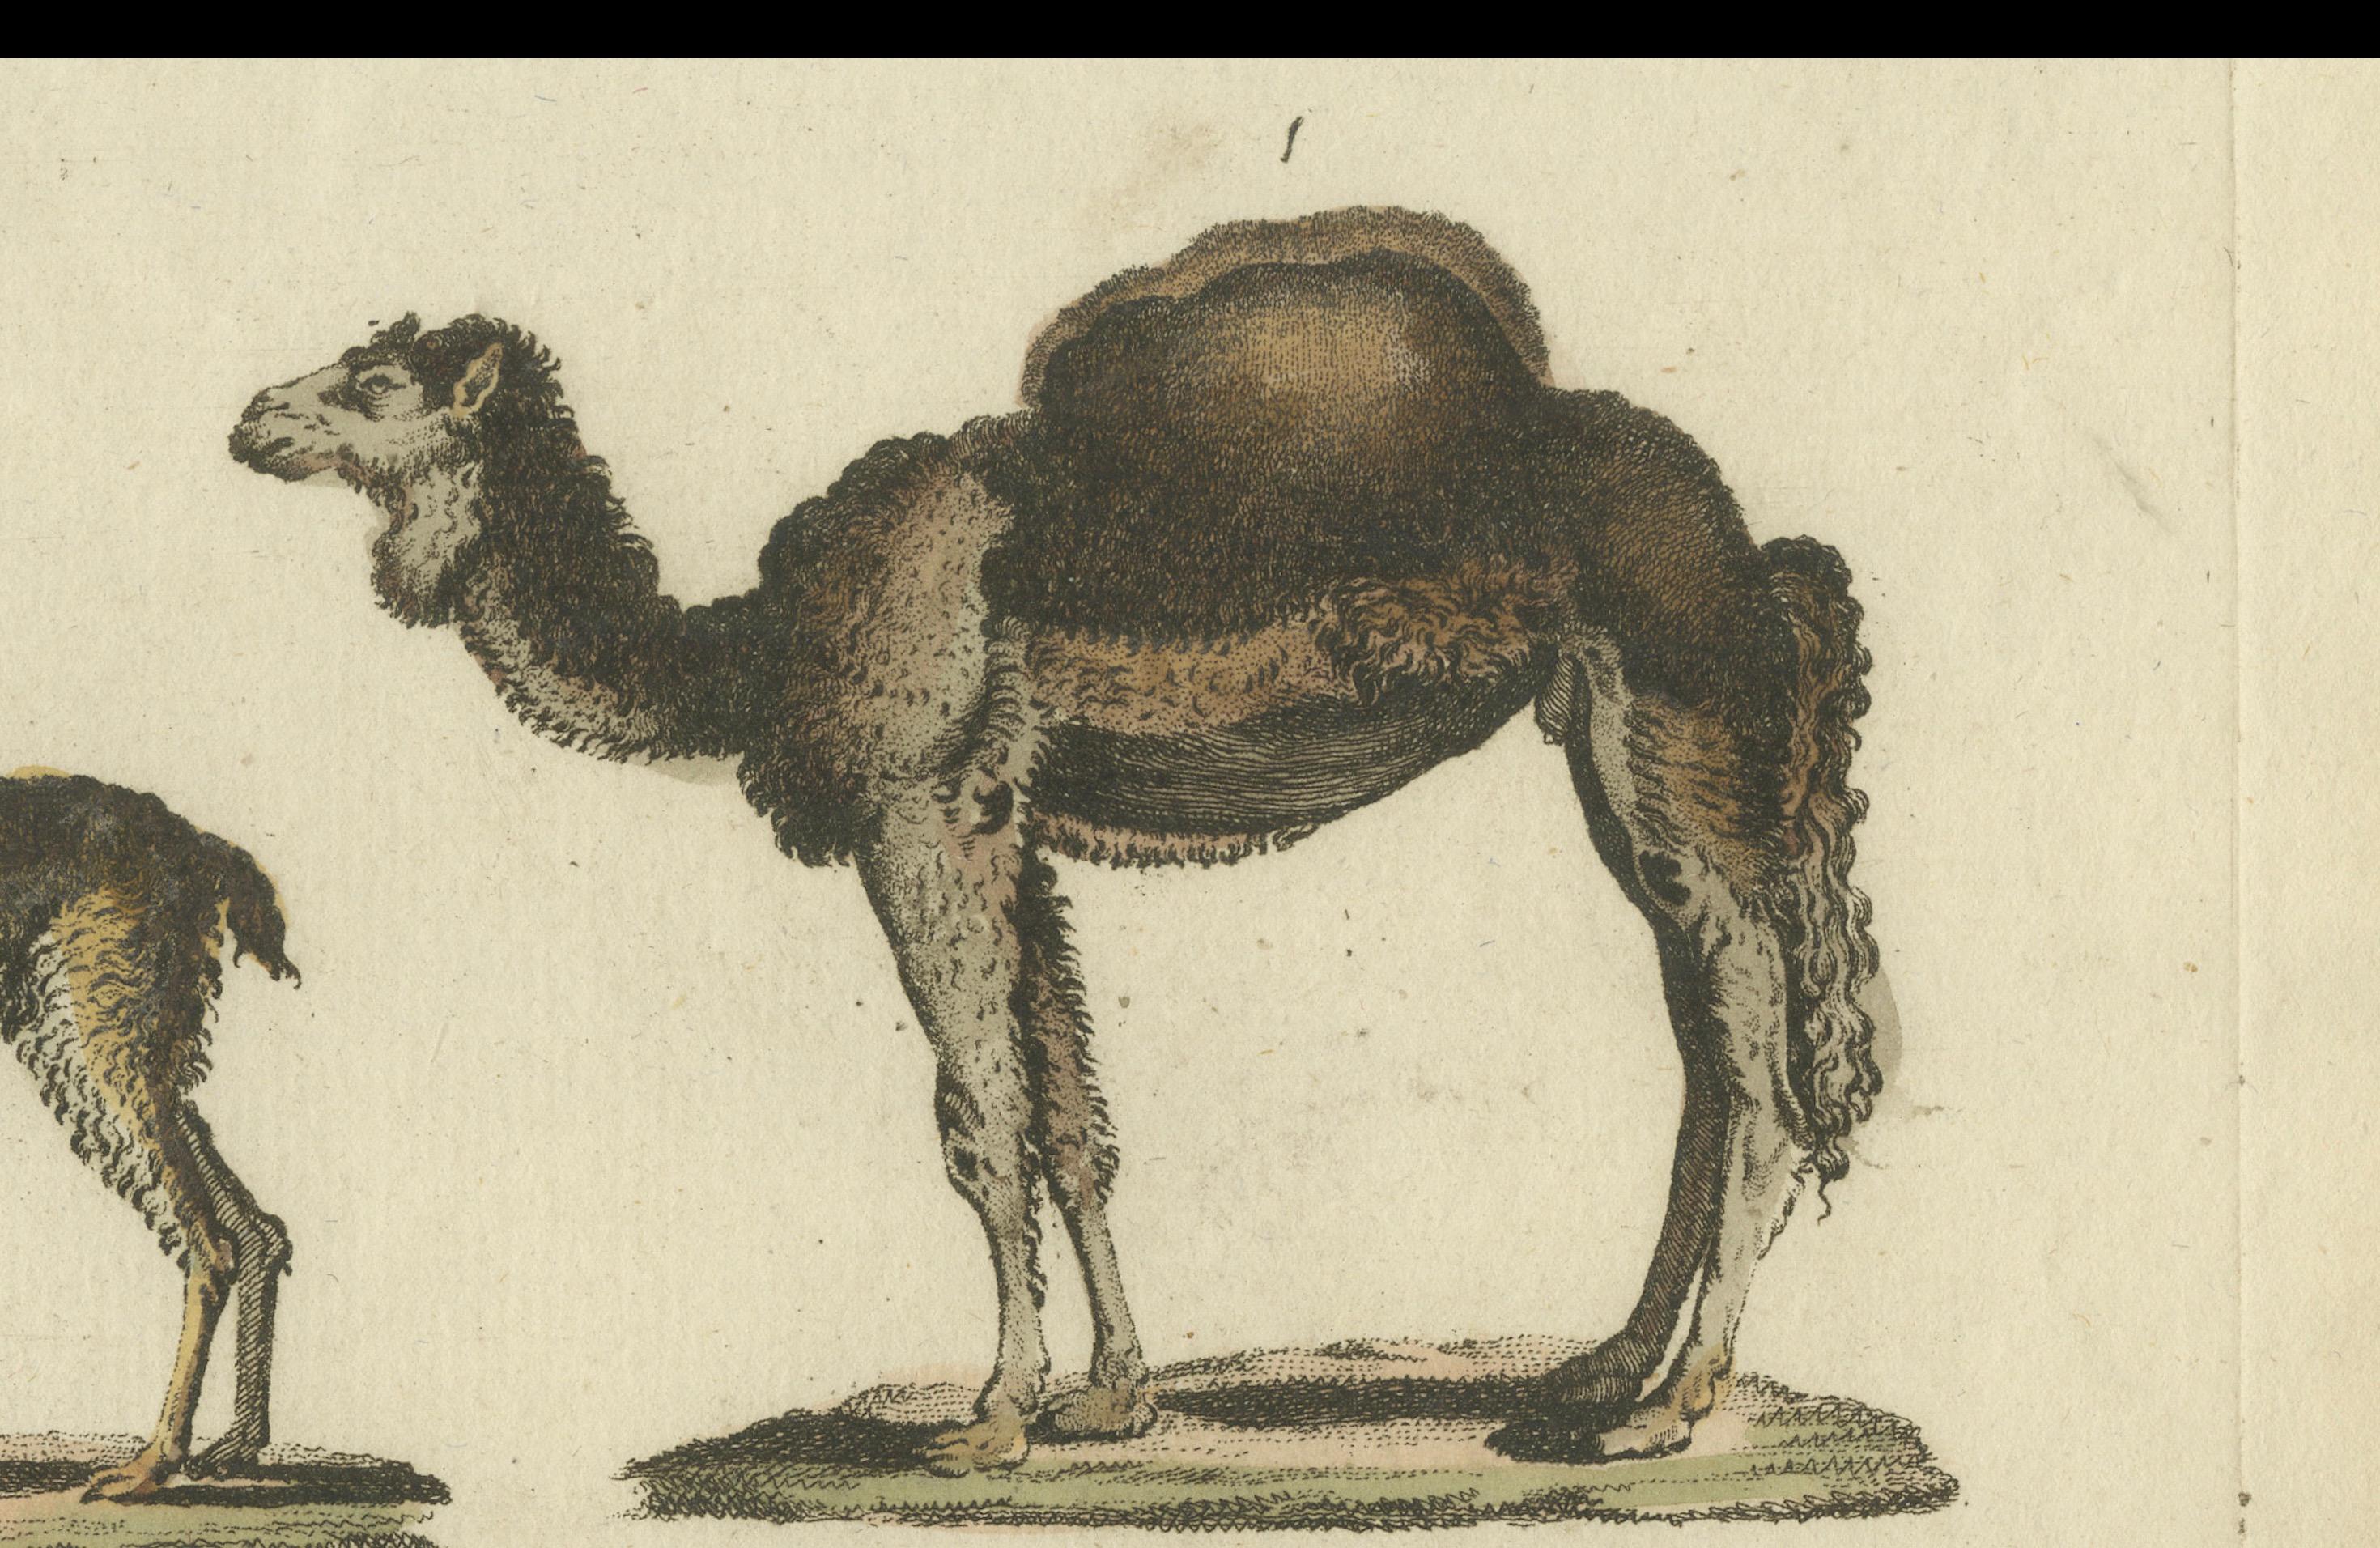 Original antique print of various species of camel. This engraved print originates from a very rare unknown Dutch work. The plates are similar to the plates in the famous German work: ‘Bilderbuch fur Kinder' by F.J. Bertuch, published 1790-1830 in